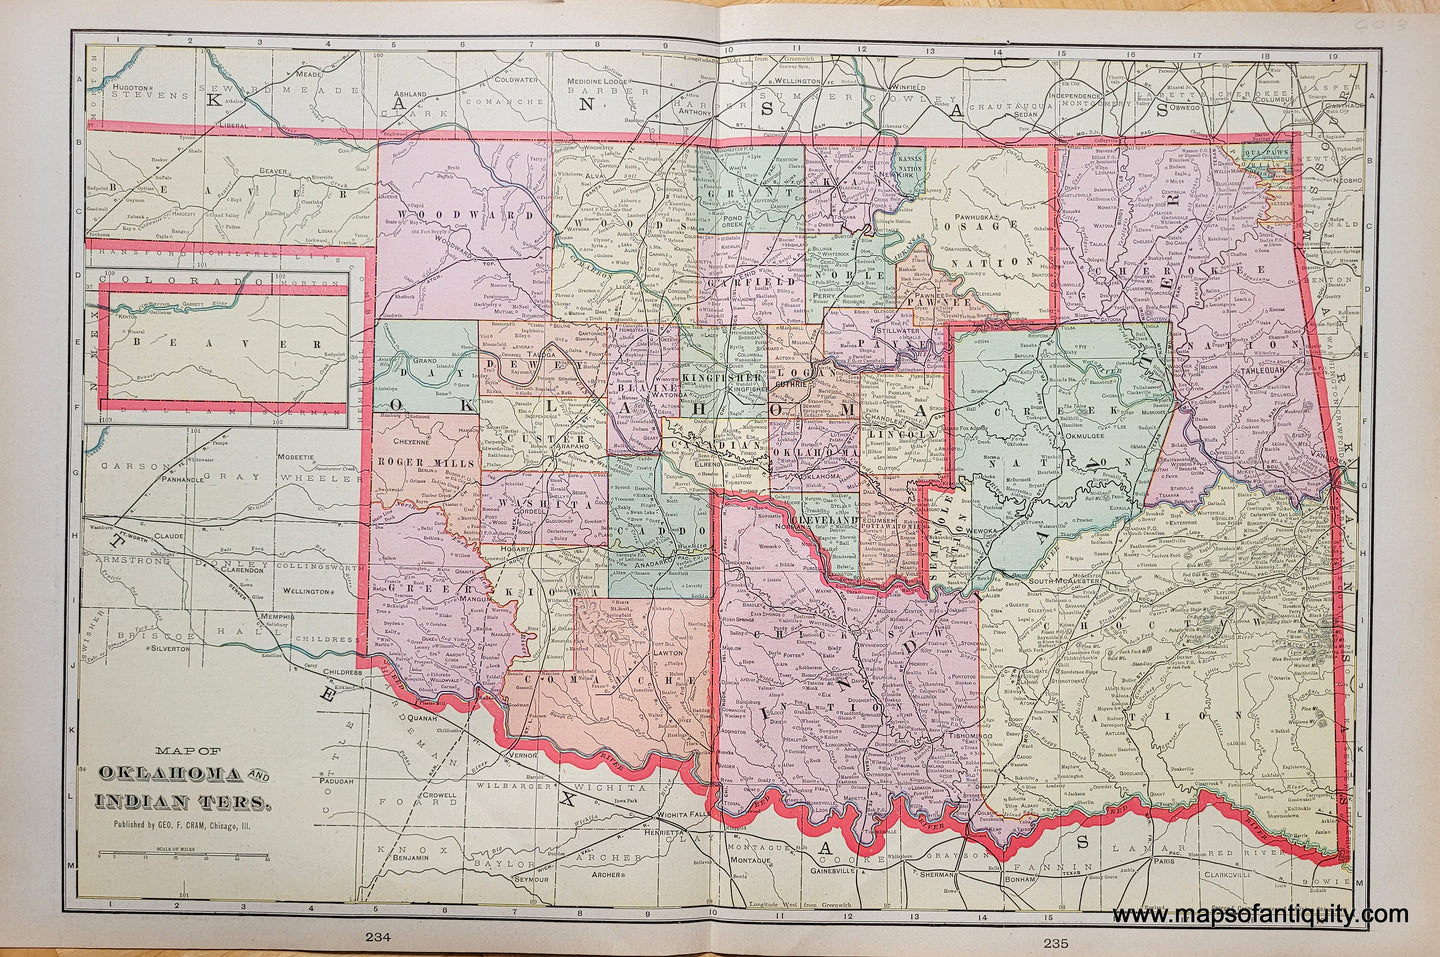 Genuine-Antique-Map-Map-of-Oklahoma-and-Indian-Territories-1903-Cram-Maps-Of-Antiquity